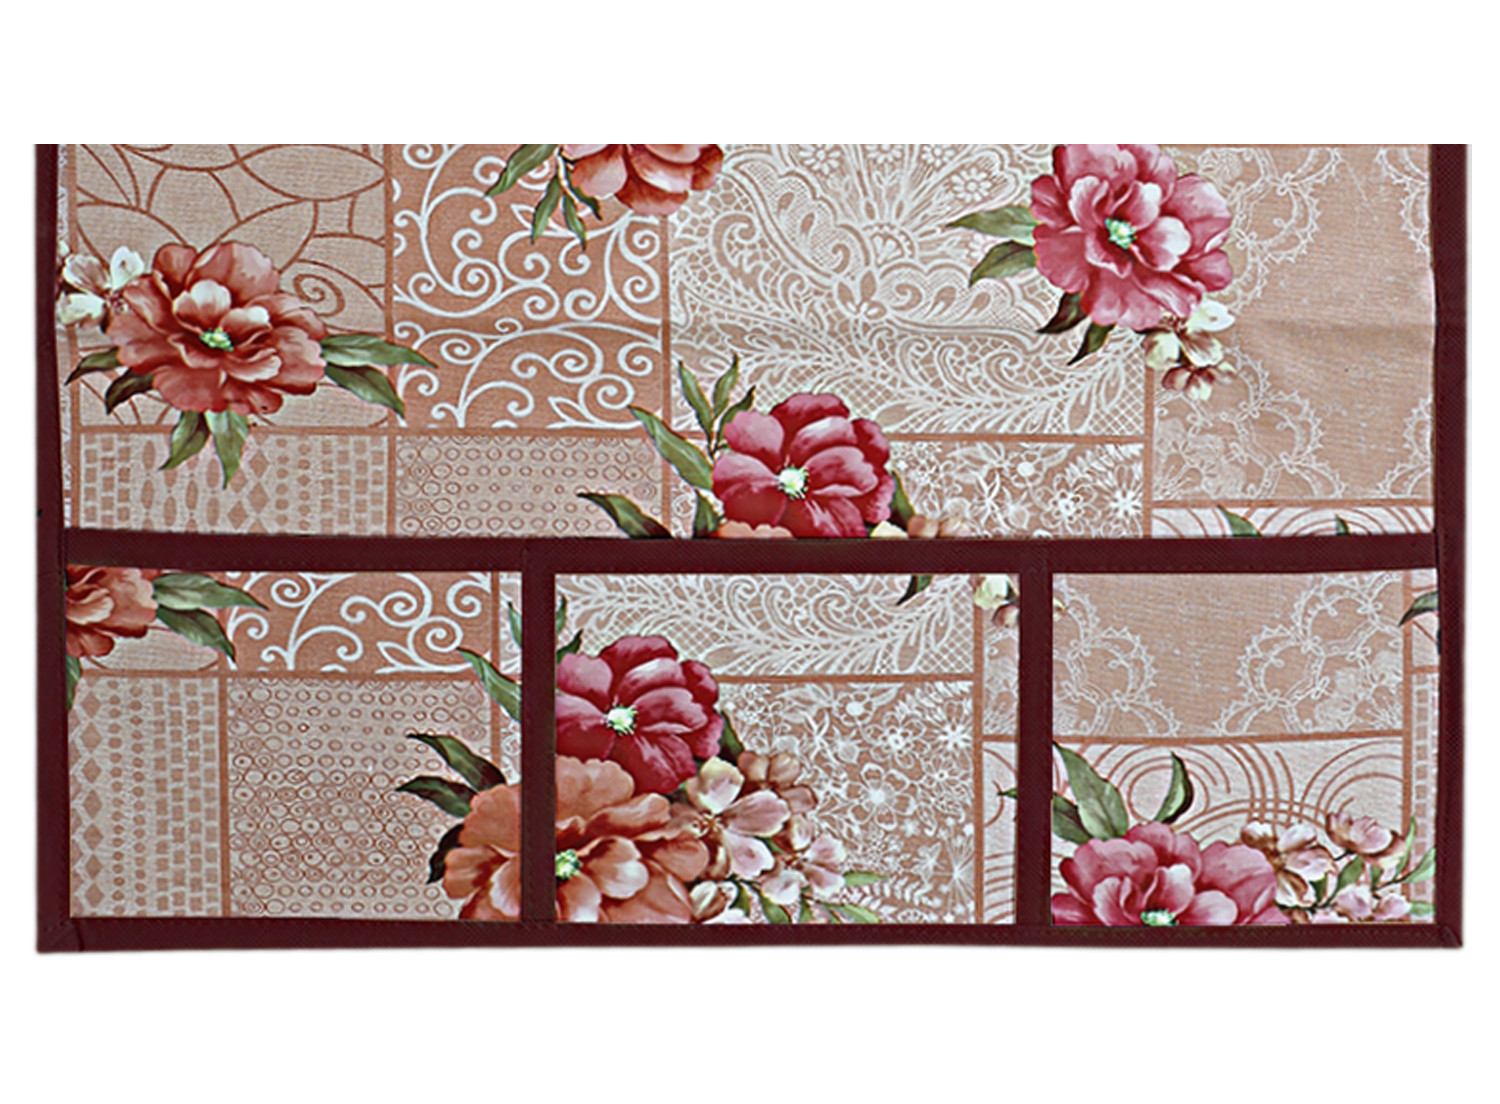 Kuber Industries Flower Printed PVC Fridge Top Cover, Protect For Scratches, Wear & Tear And Dust With 6 Utility Side Pockets (Peach)